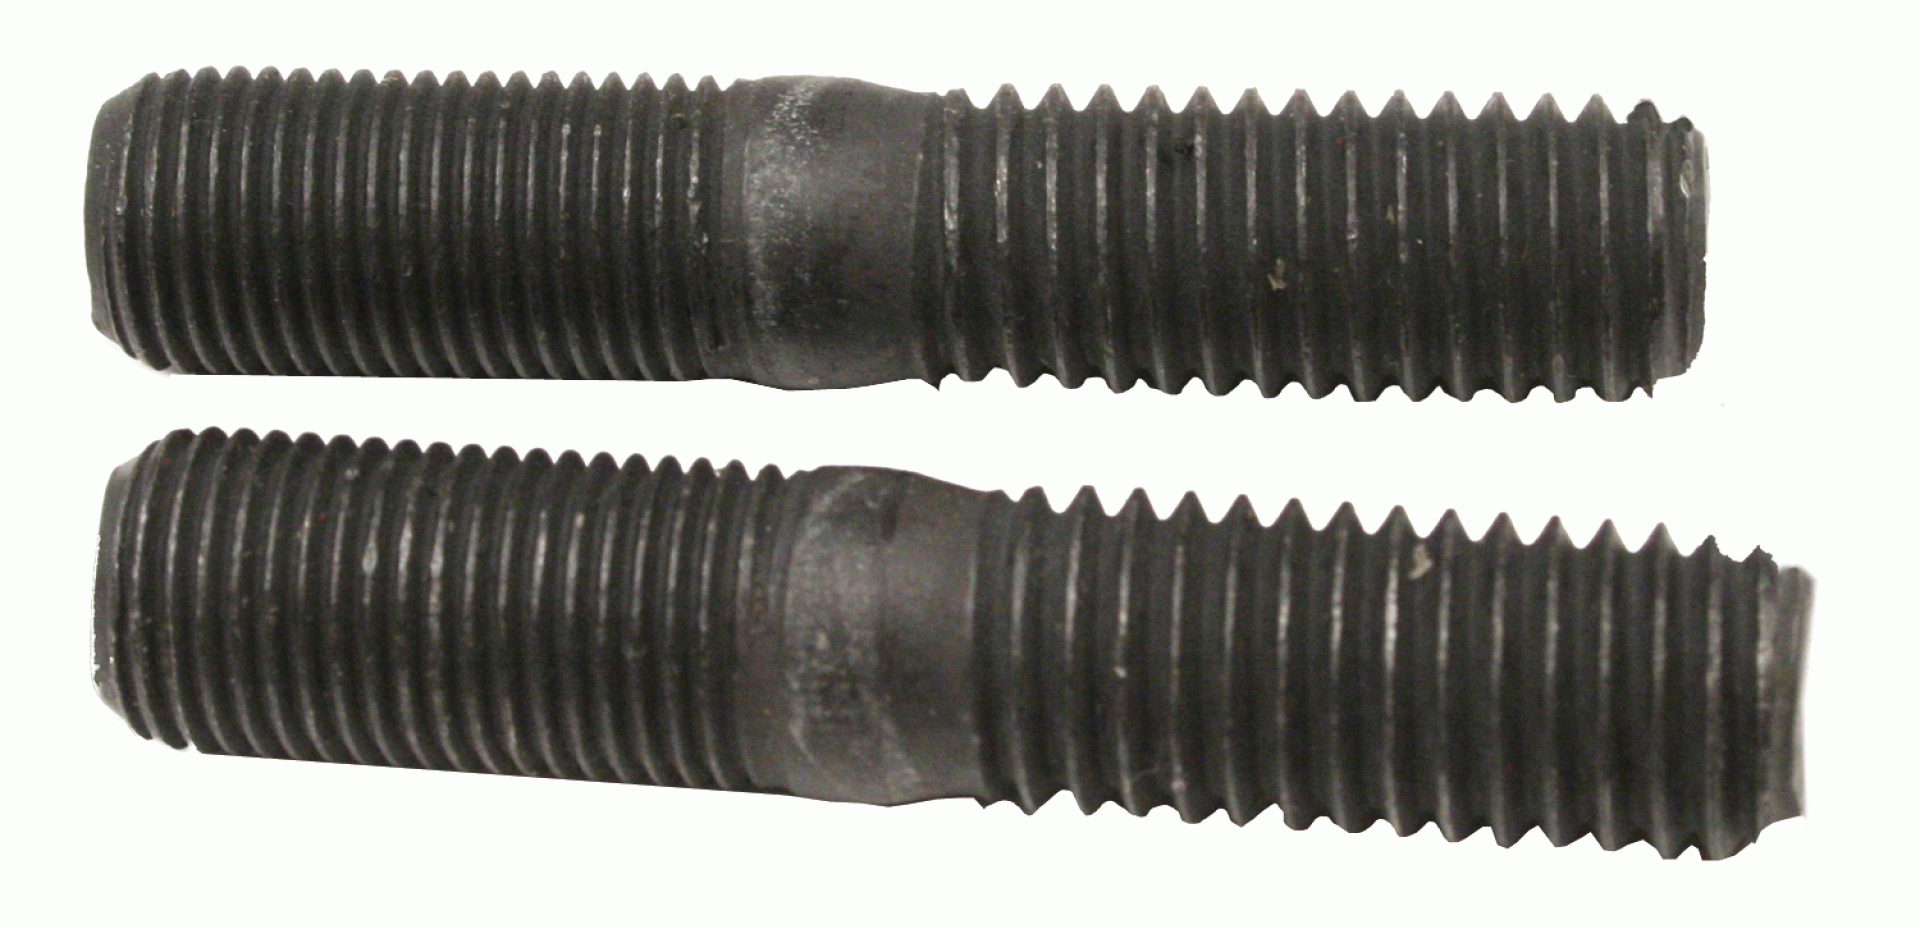 N TOW | 0318 | SCREW IN STUD - DIAMETER & PITCH: 1/2"-13 X 1/2"-20 LENGTH: 2.38" MOBILE HOME HUBS